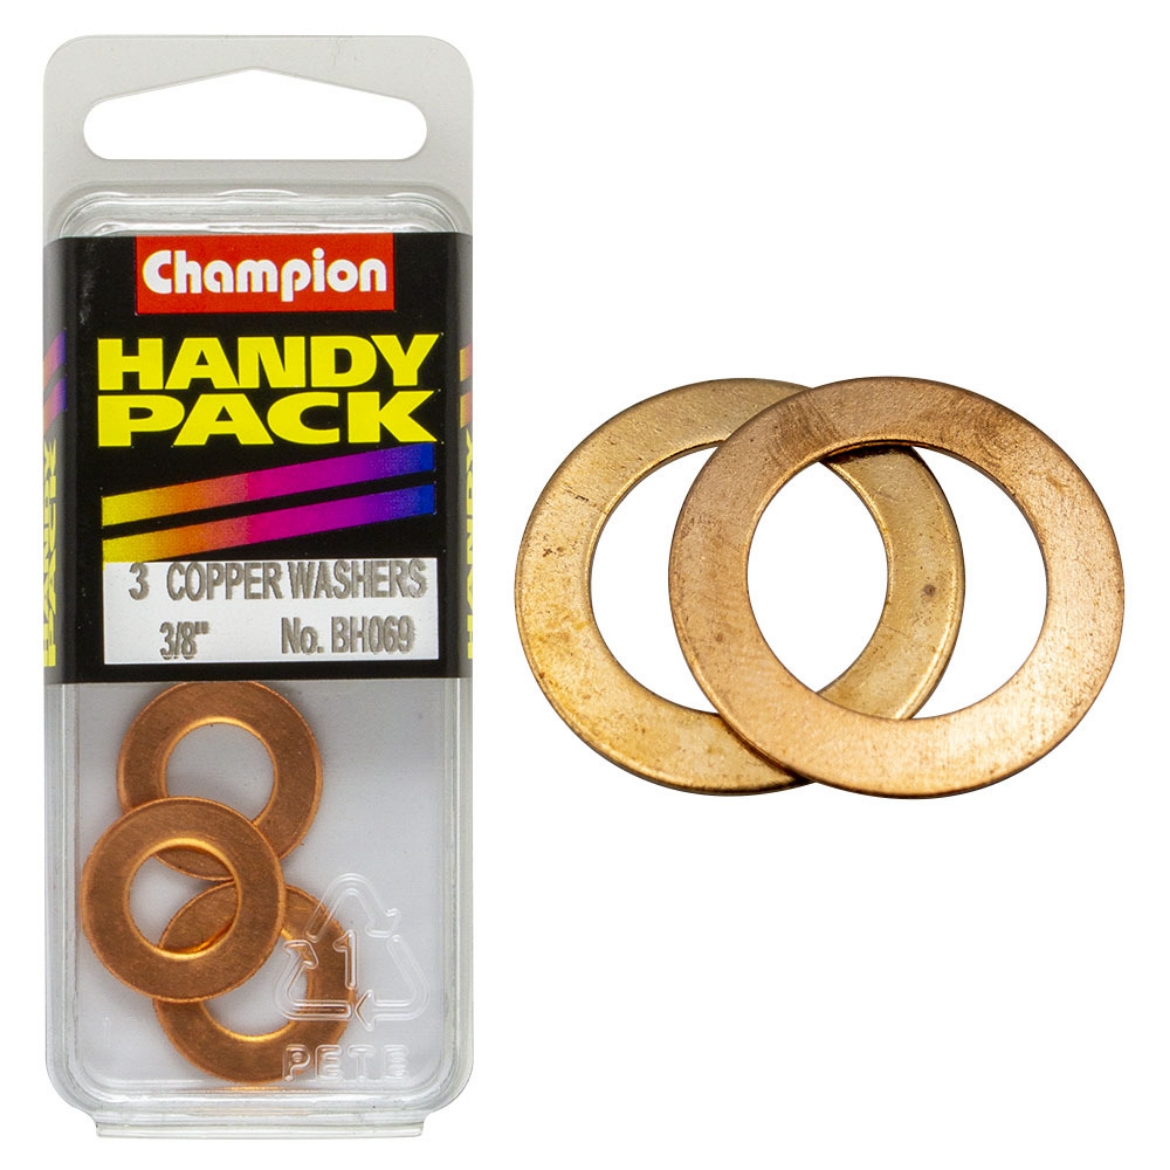 Picture of Handy Pk Copper Washers 20g 3/8x3/4 CWC (Pkt.3)